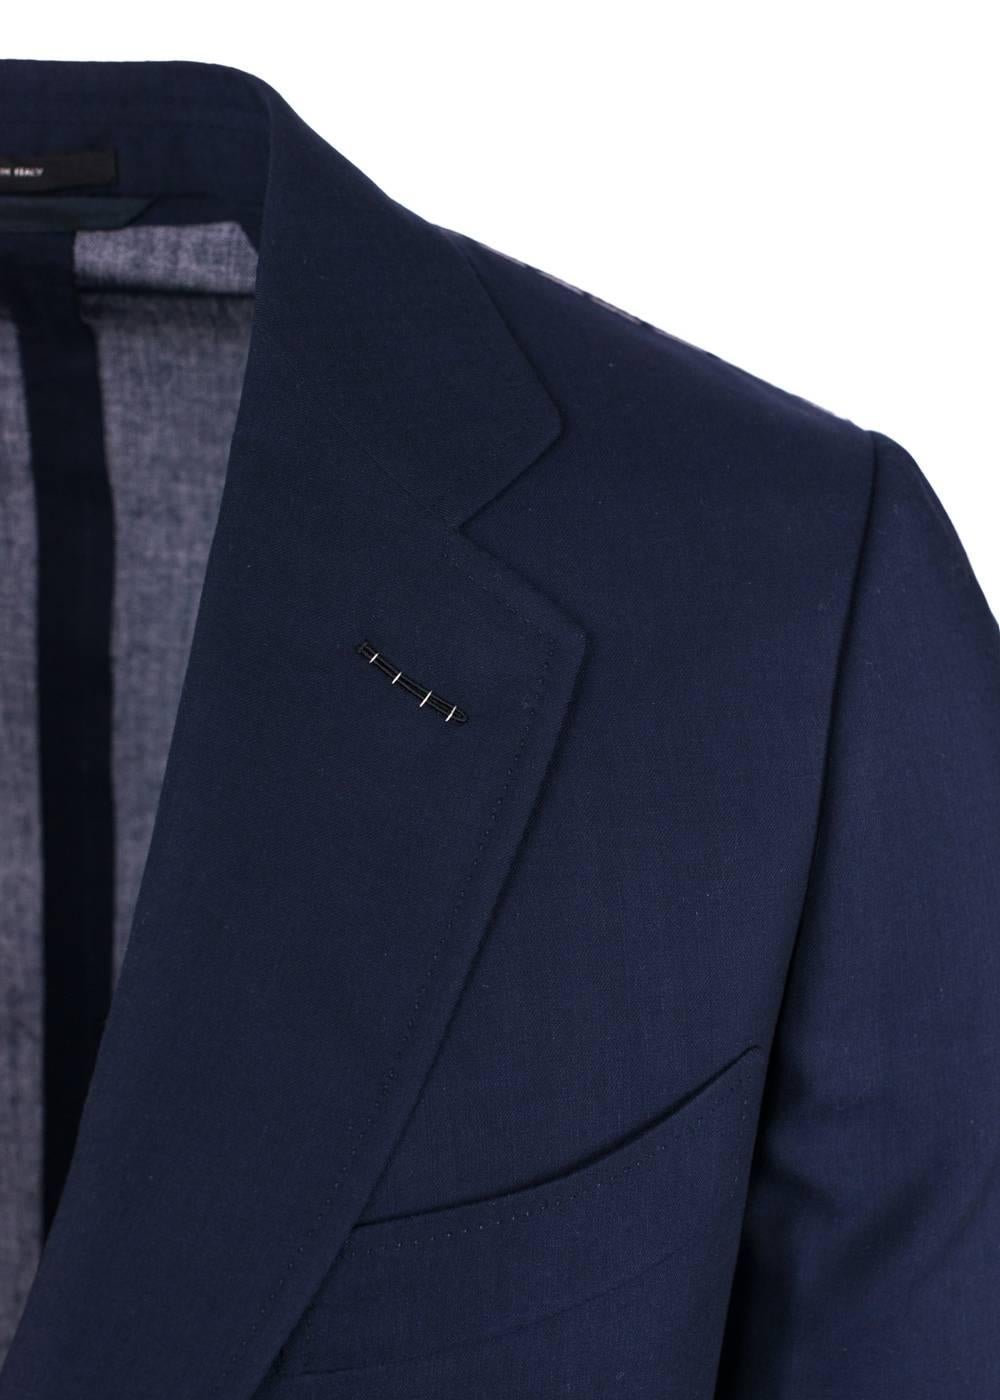 Tom Ford Navy Cashmere Shelton Sport Jacket In New Condition For Sale In Brooklyn, NY